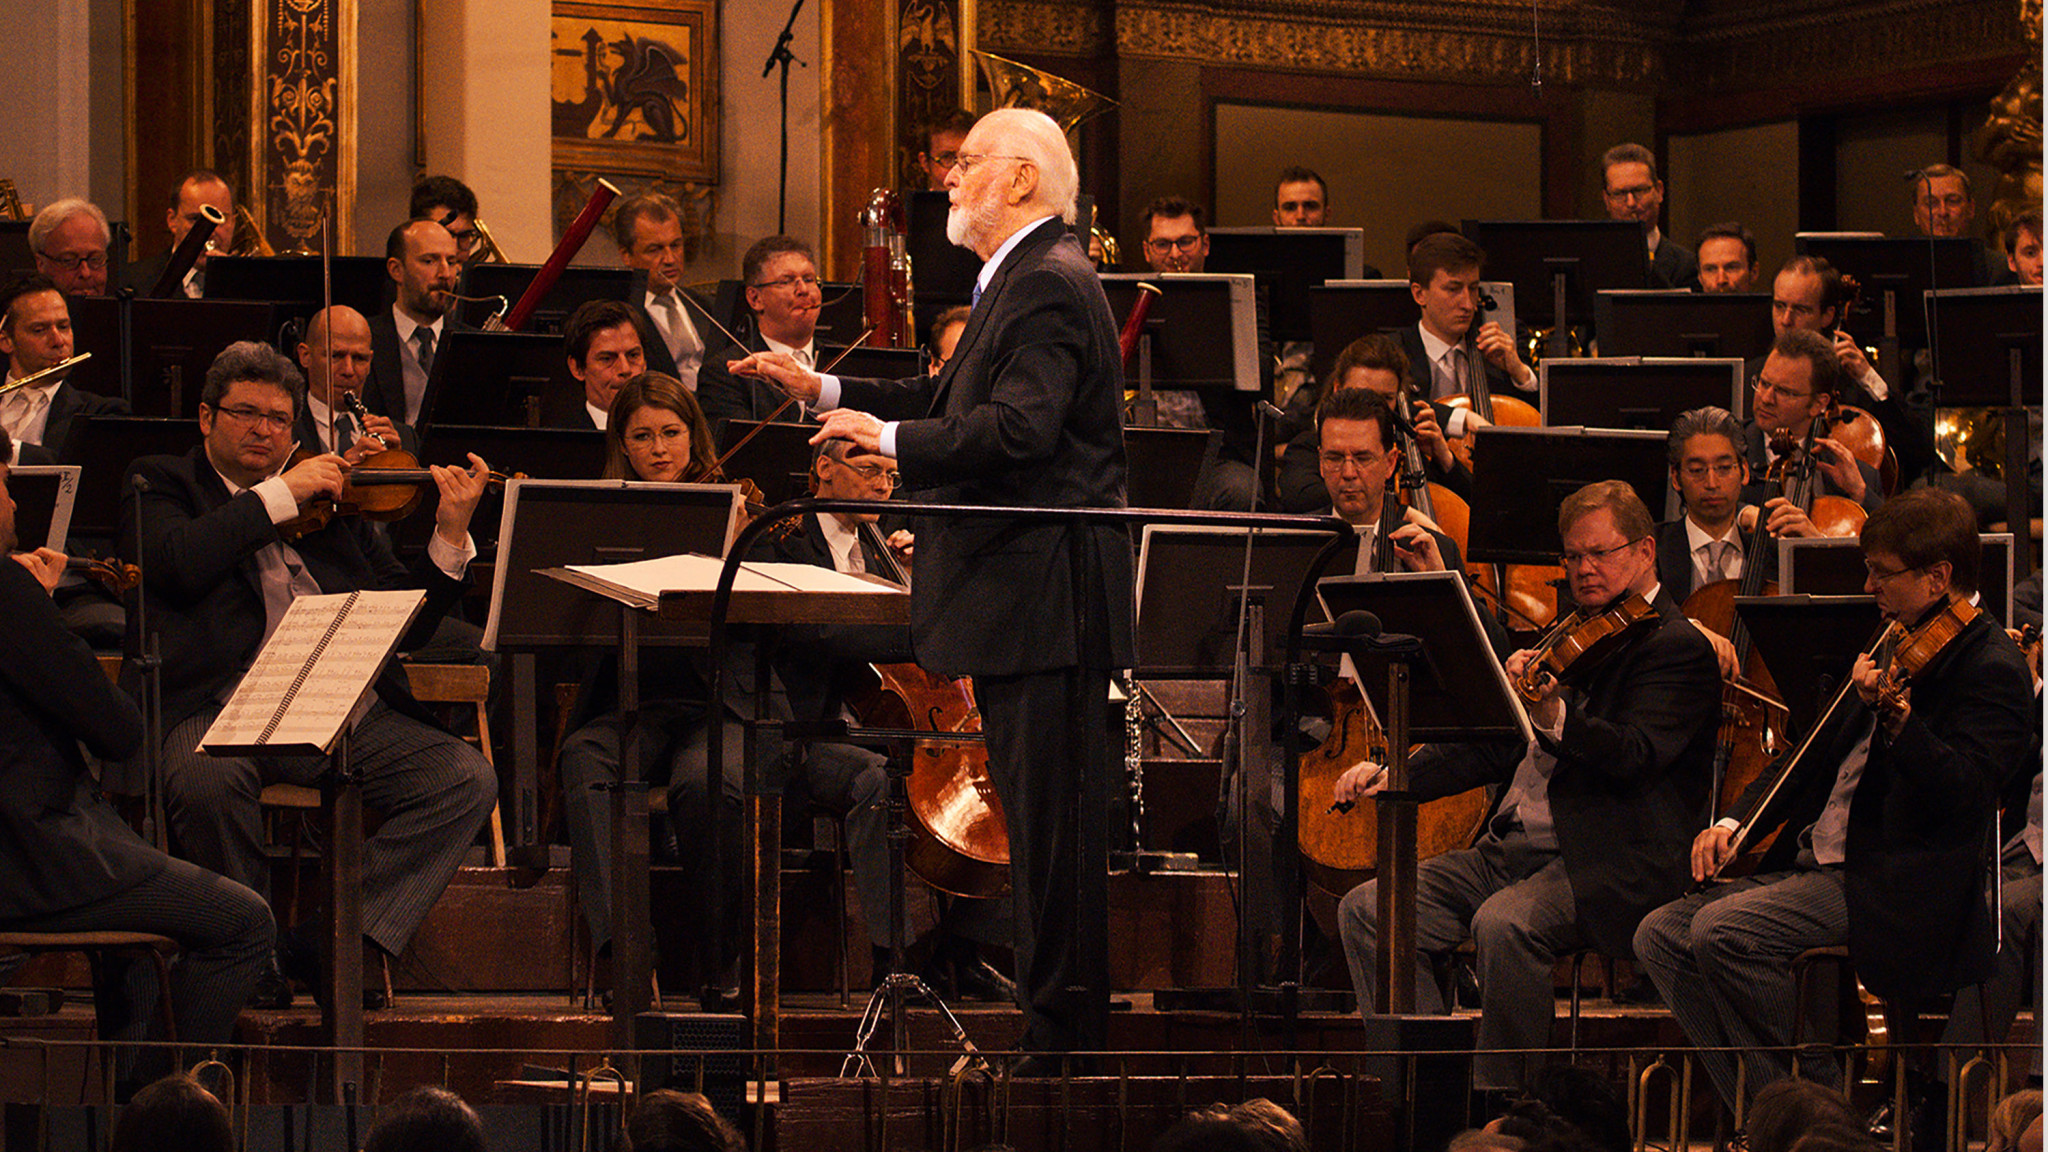 John Williams in Vienna – release on multiple formats including both audio and video versions with Dolby Atmos® sound